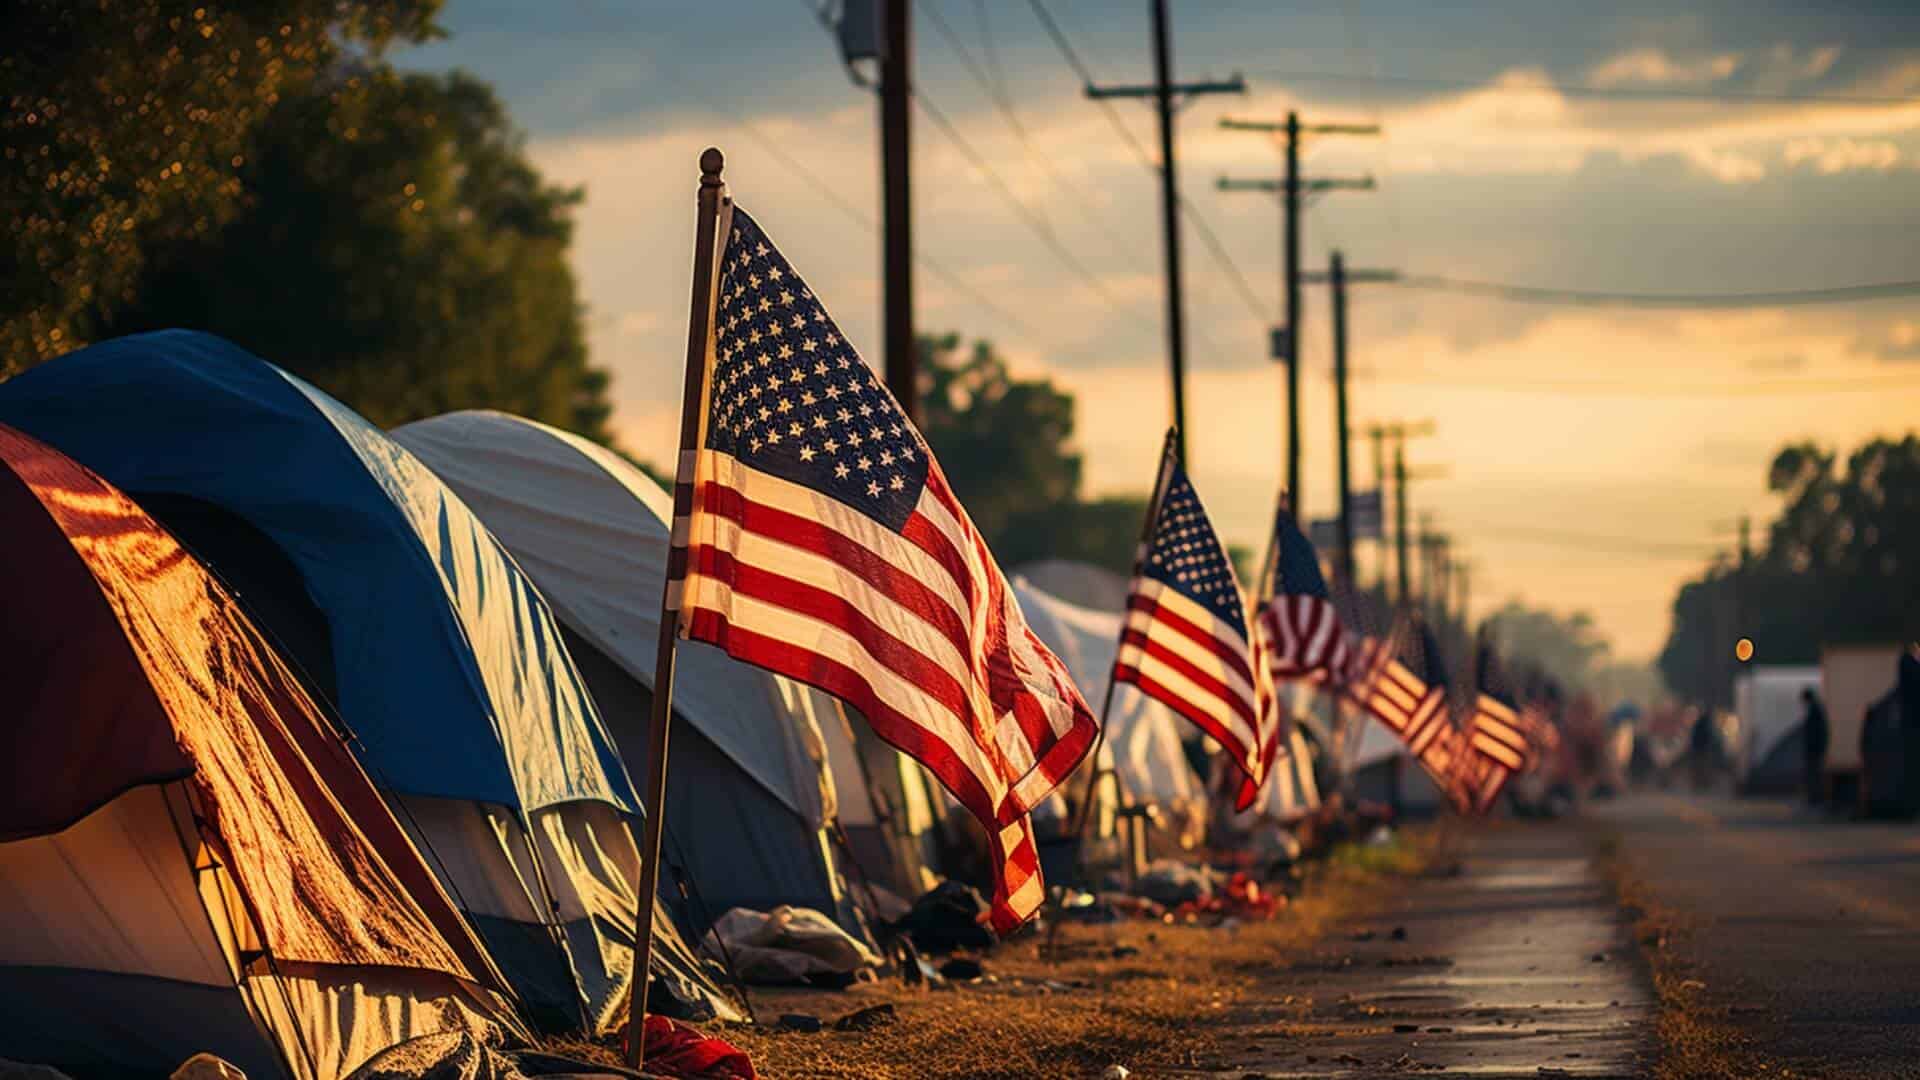 Why California is a Great State for Real Estate Investing - homeless encampment tent city, American flags in ground along street sidewalk